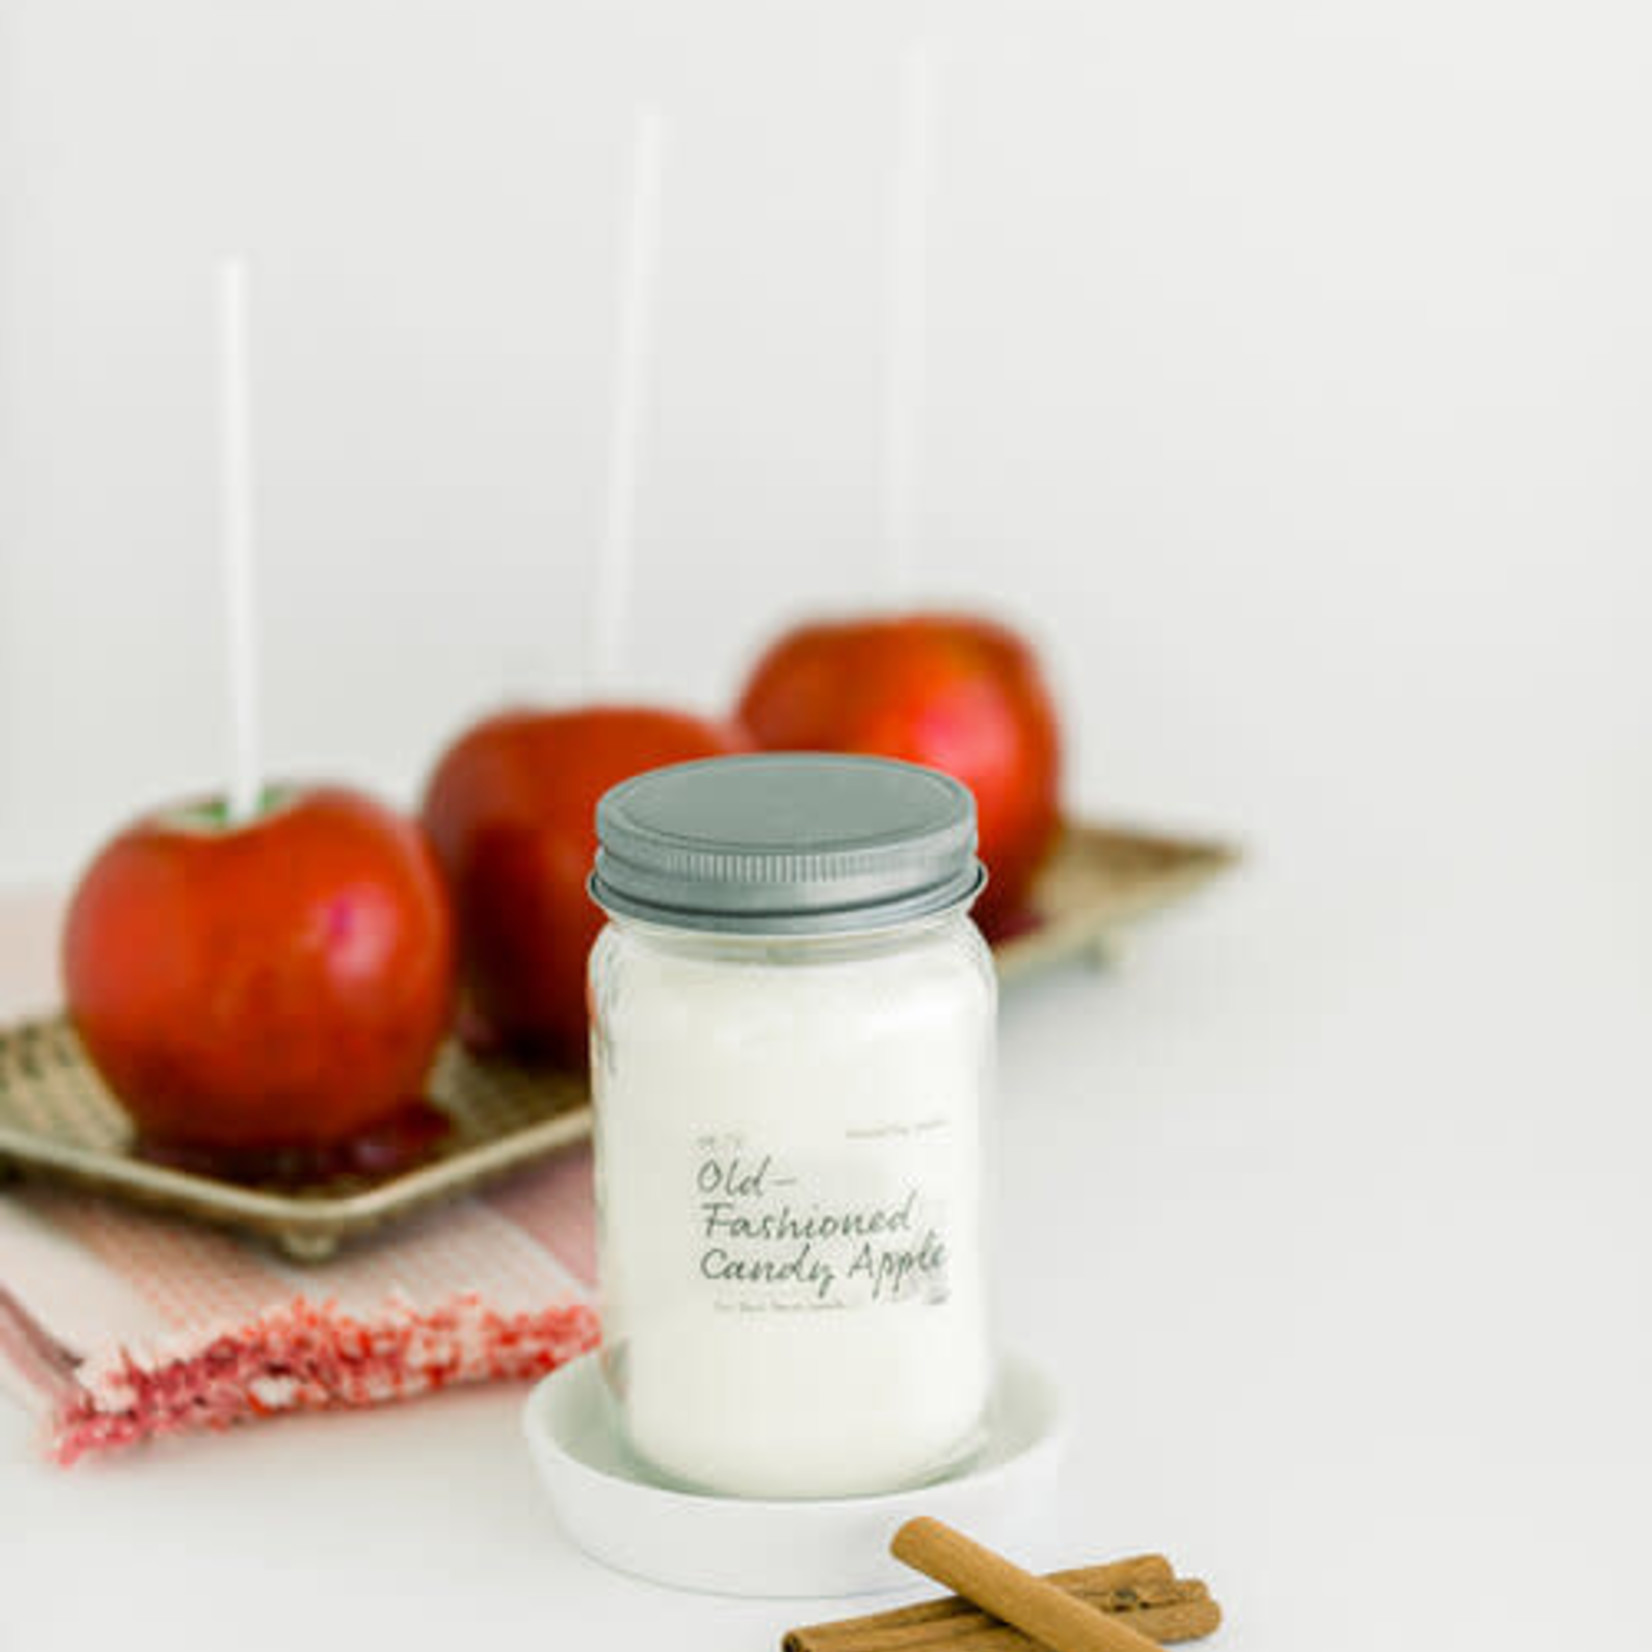 Old Fashion Candy Apple 16oz Candle